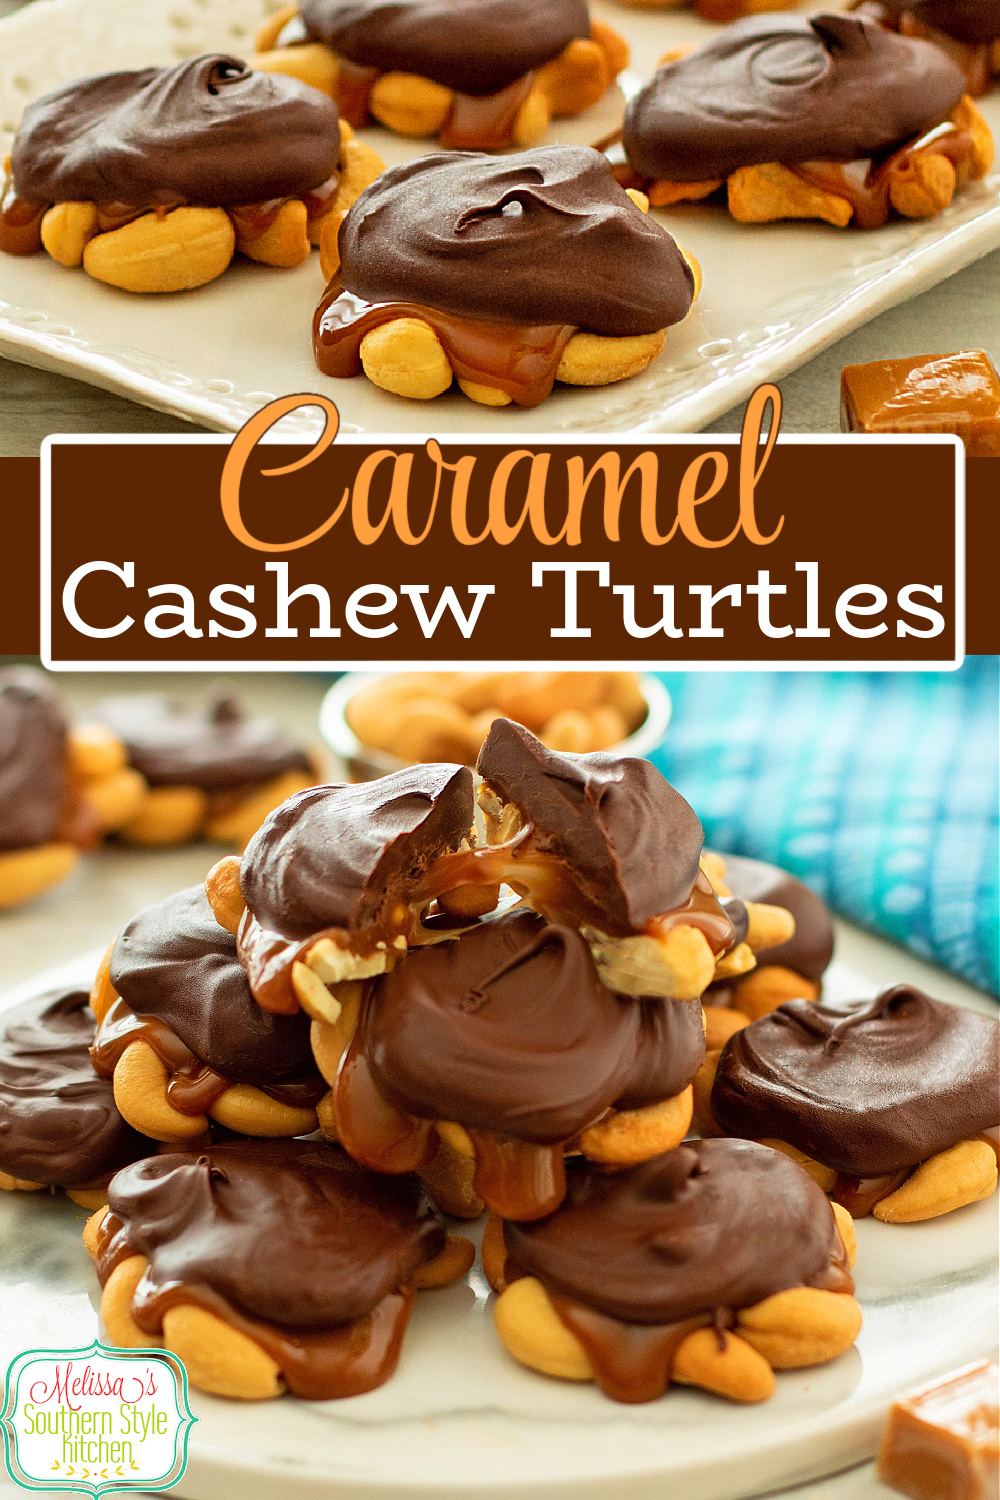 This easy chocolate caramel Cashew Turtles Candy recipe is ideal for homemade gift giving and adding to your two bite holiday sweets. #candy #turtlescandy #cashewturtles #homemadecandy #sweets #christmascandy #caramel #cashews via @melissasssk